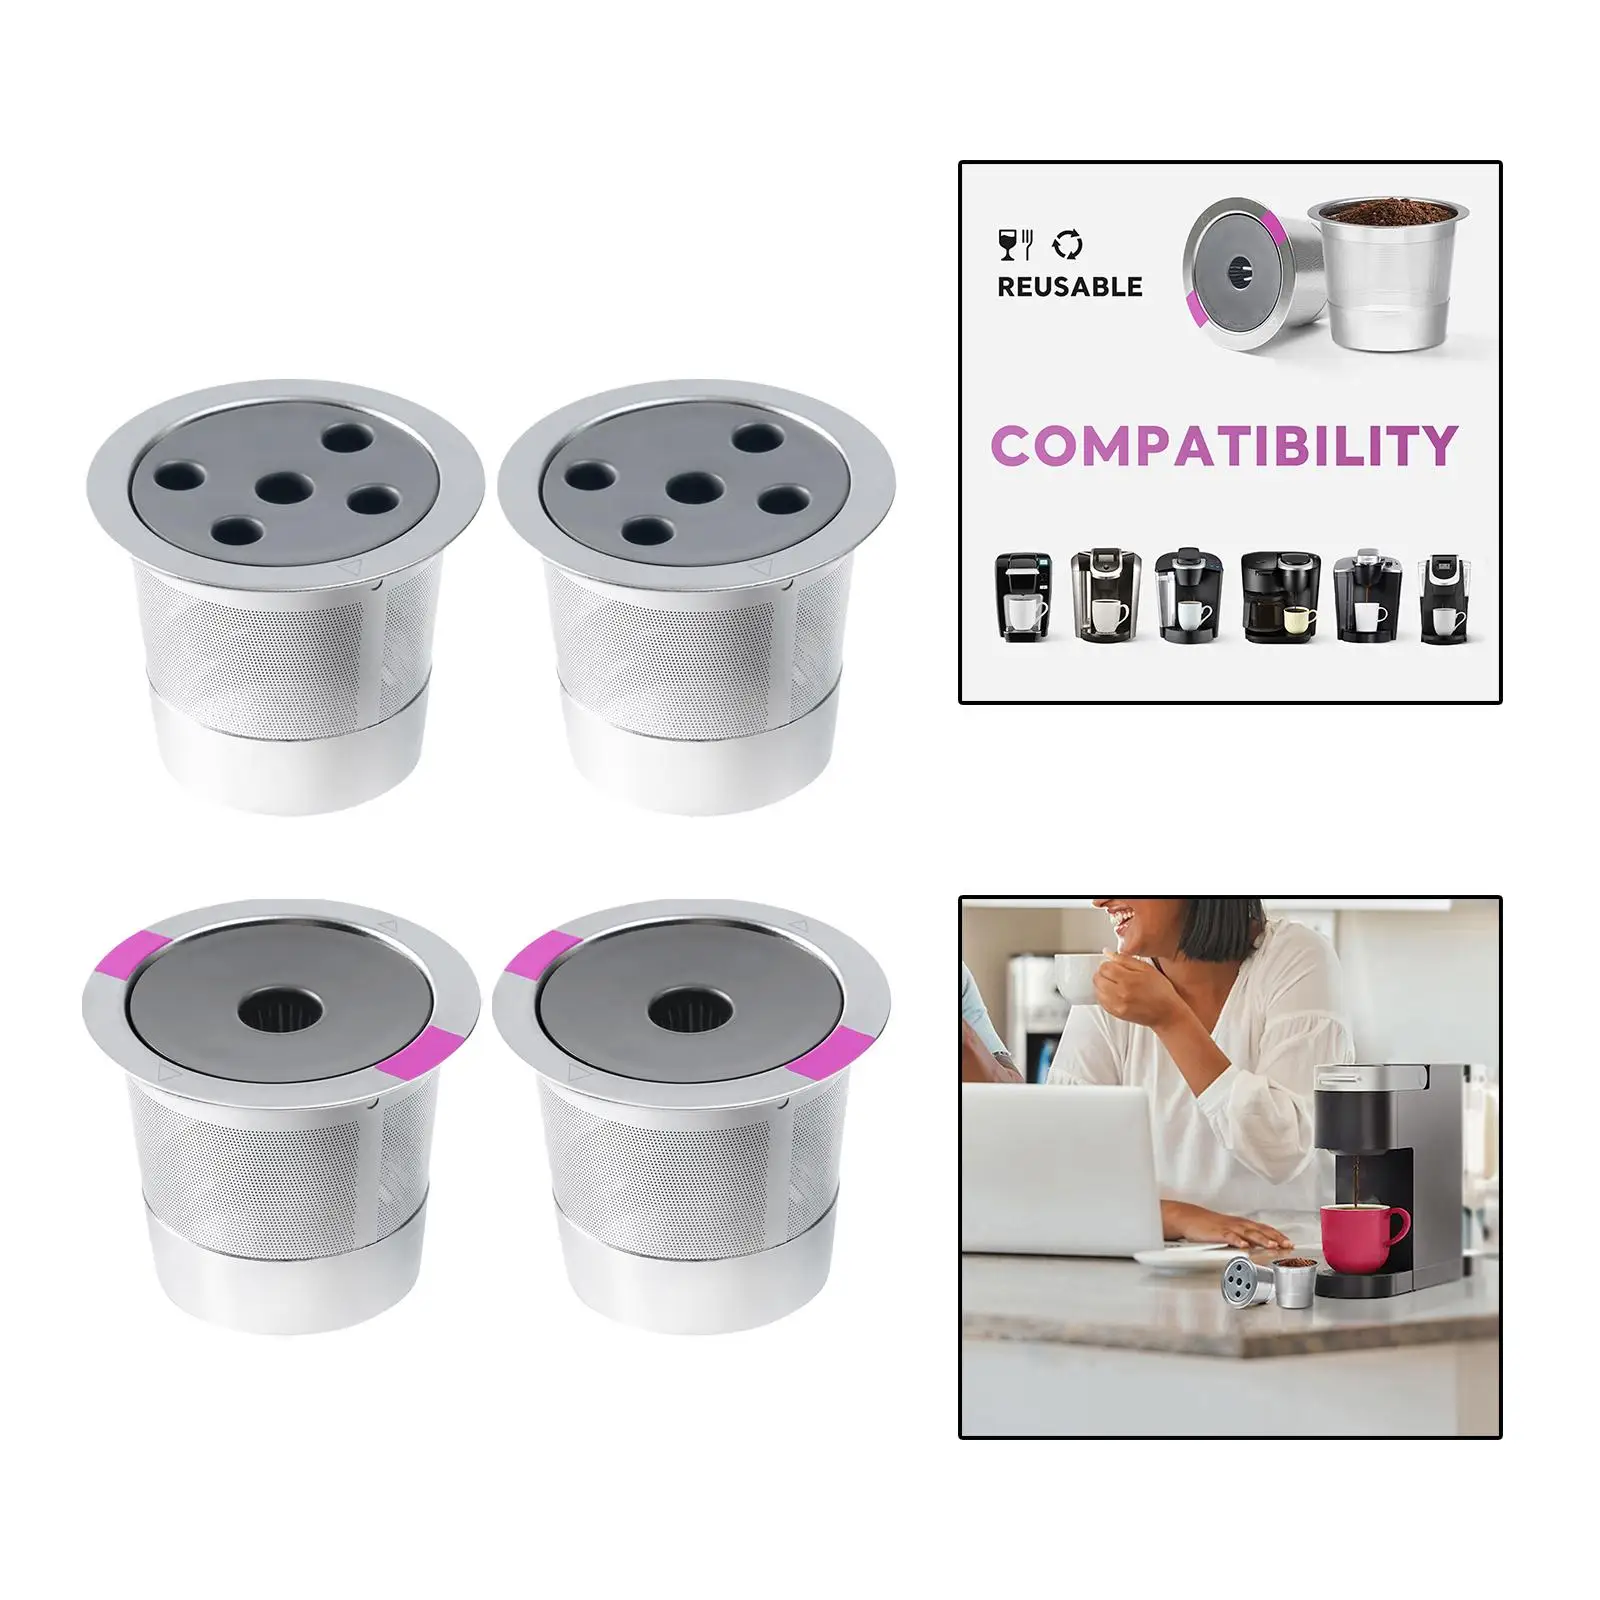 2 Pieces Coffee Pod Capsule Single Serve Replacement for Coffee Makers